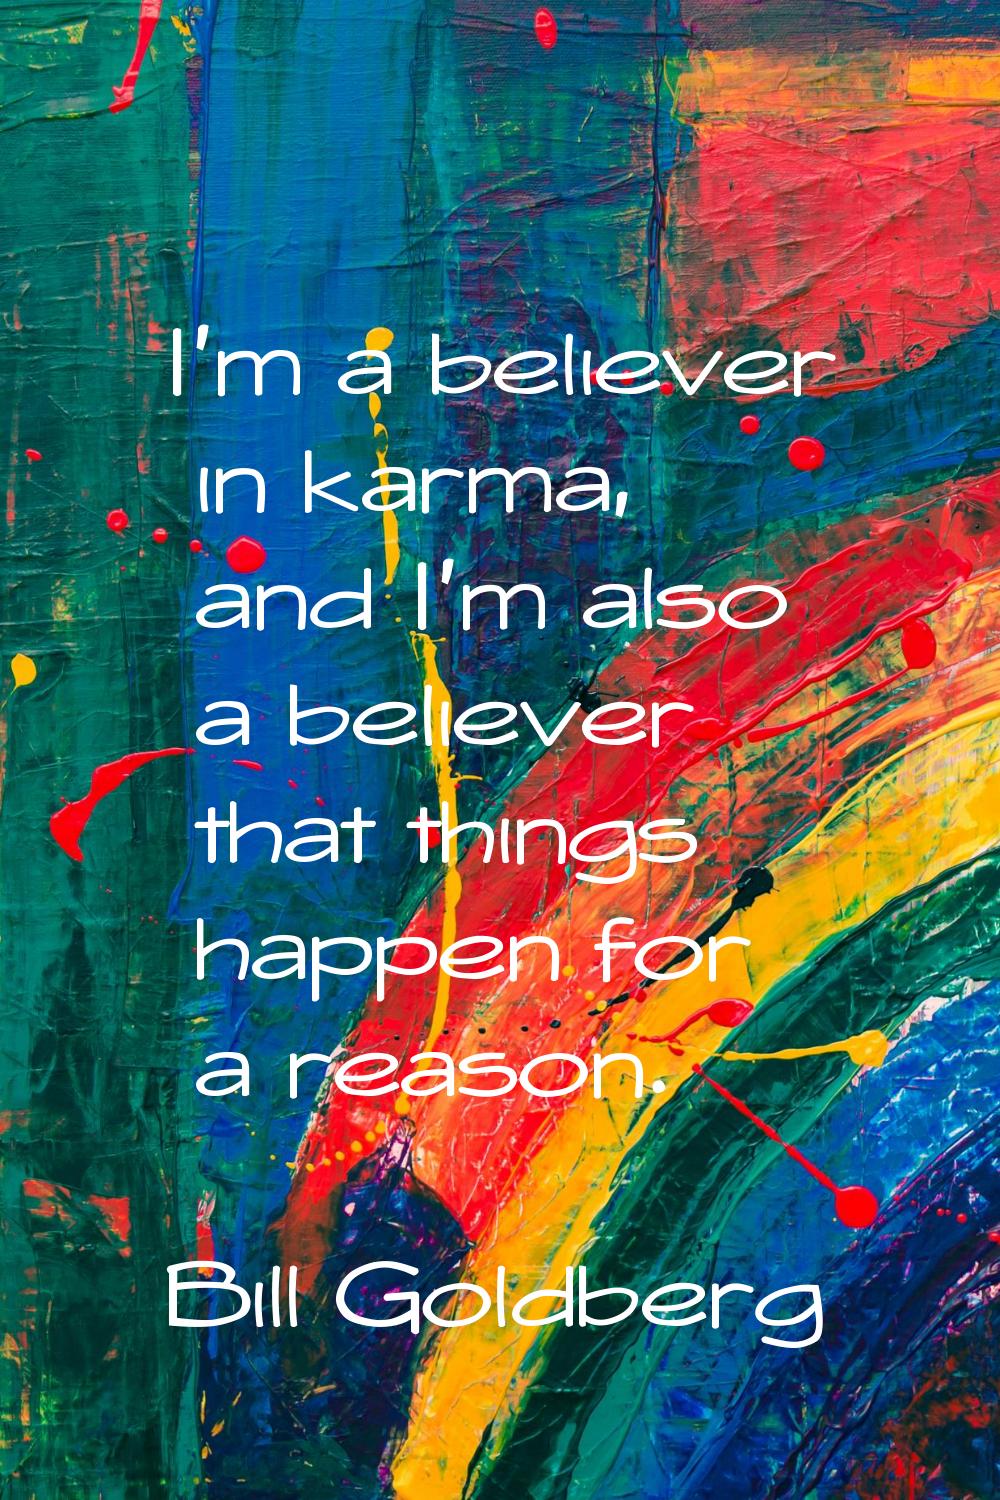 I'm a believer in karma, and I'm also a believer that things happen for a reason.